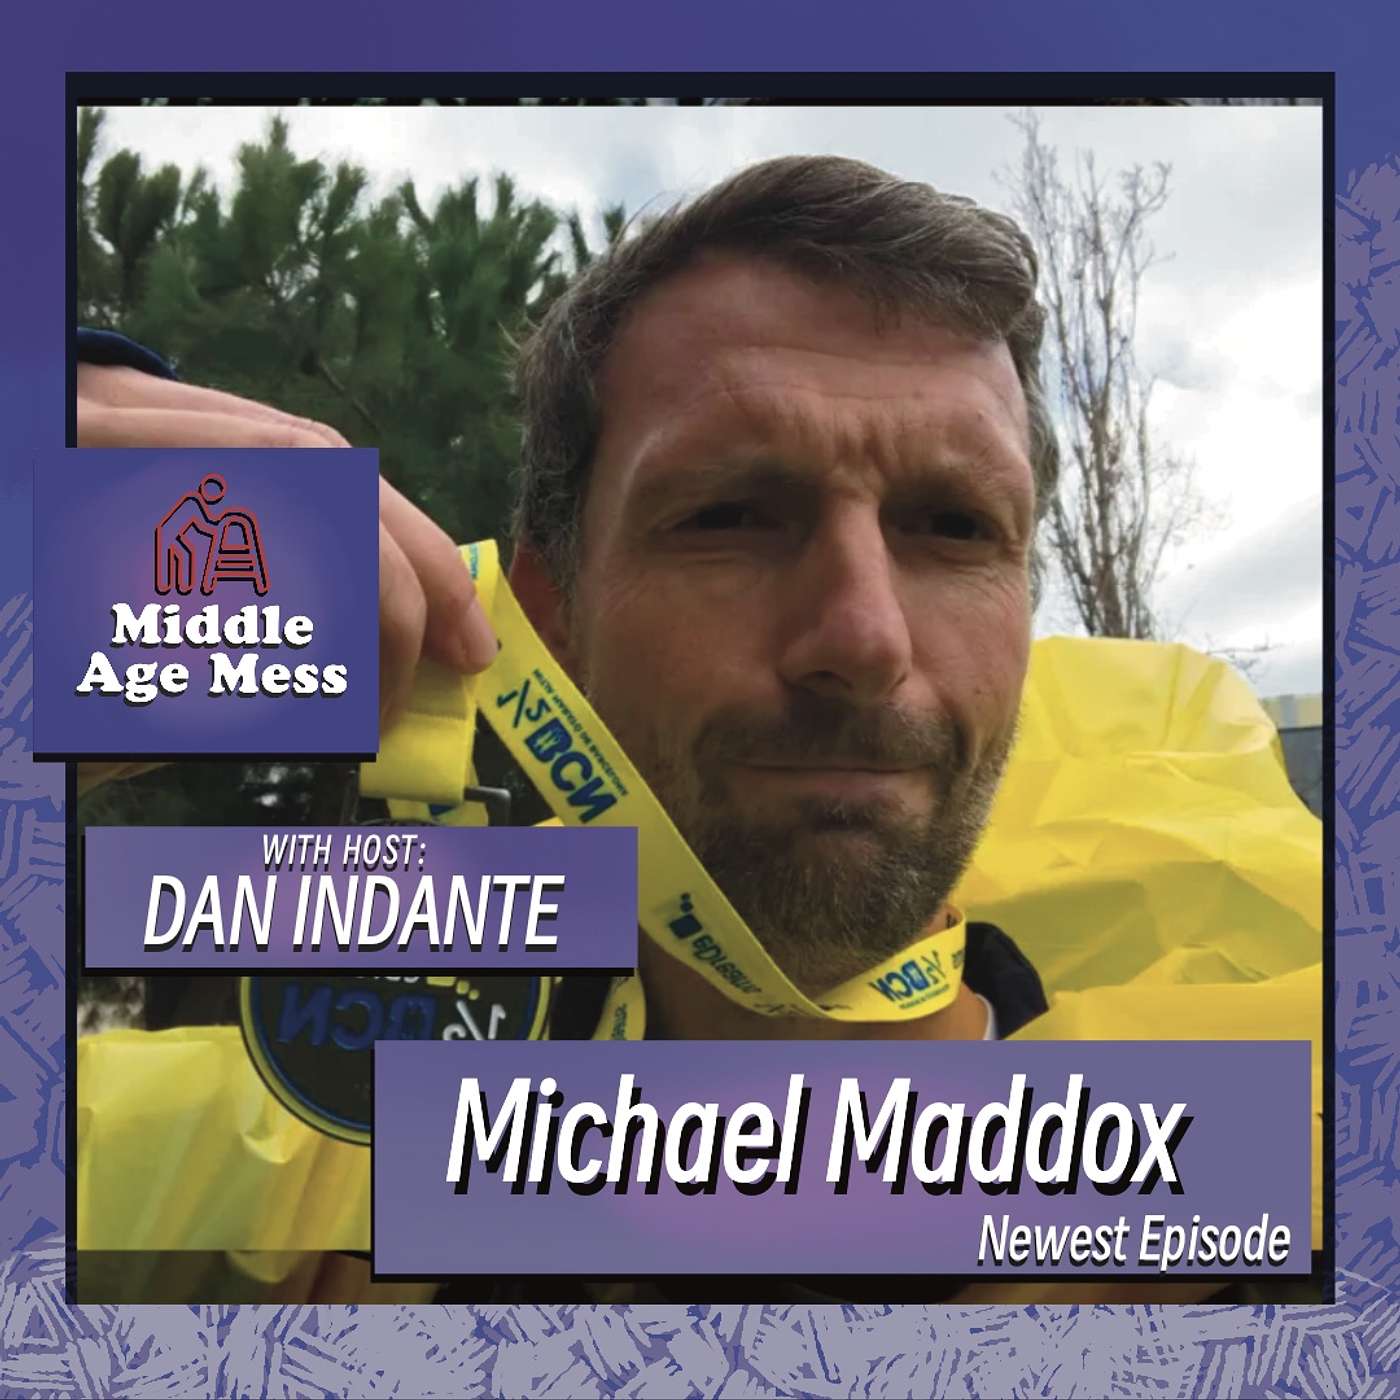 Middle Age Mess, Episode 5 - Michael Maddox